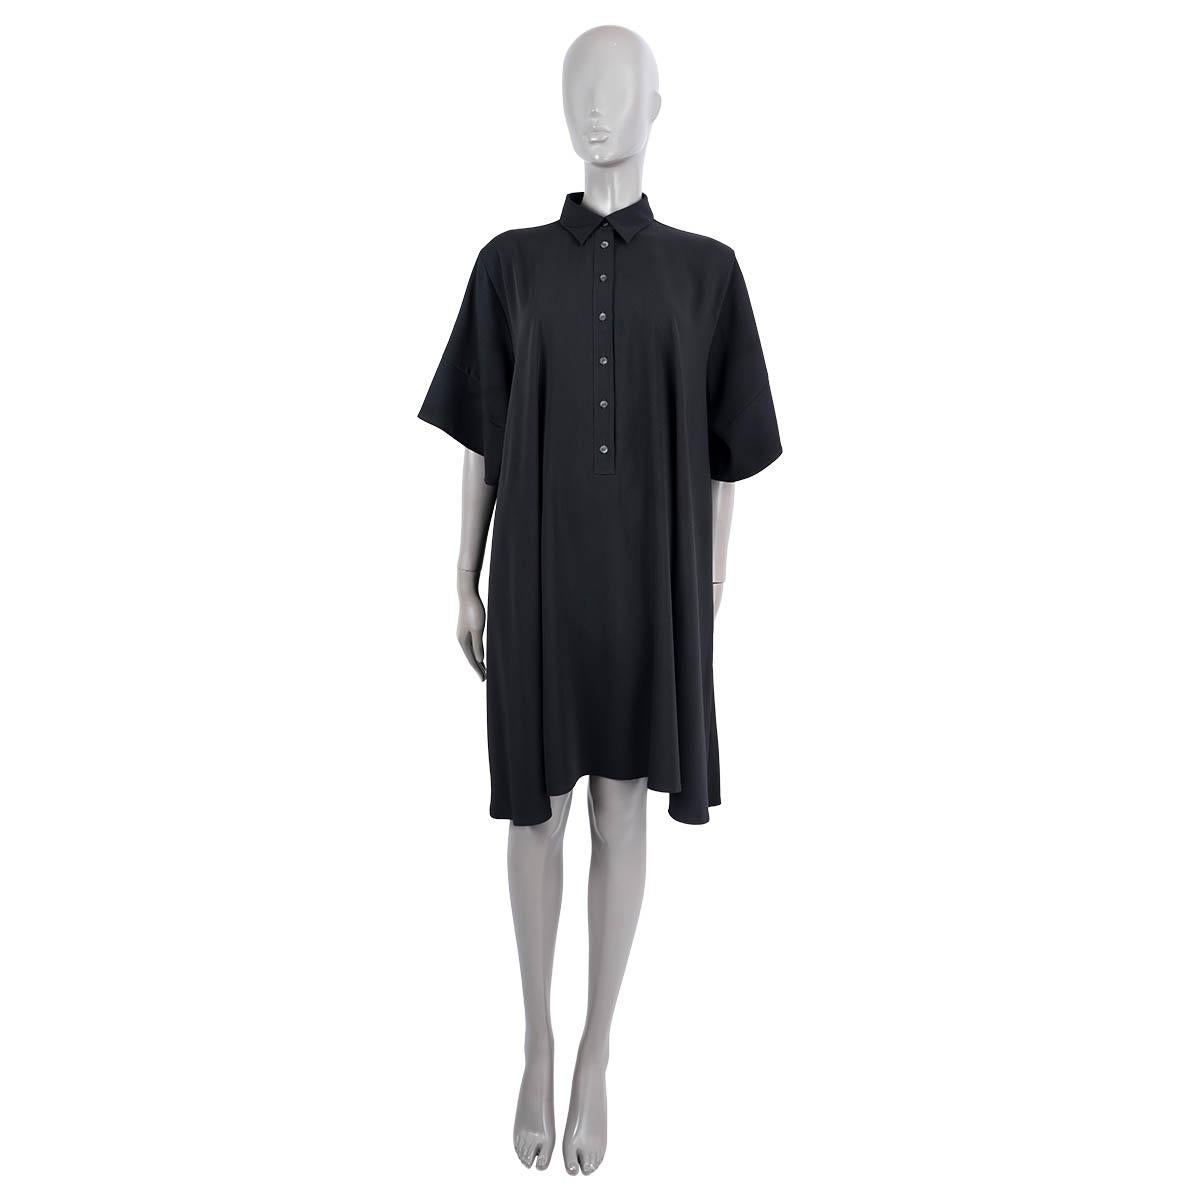 100% authentic MM6 Maison Margiela short sleeve oversized A-line mini shirt dress in black polyester (100%). The design features six buttons on the front. Unlined. Has been worn and is in excellent condition.

Measurements
Tag